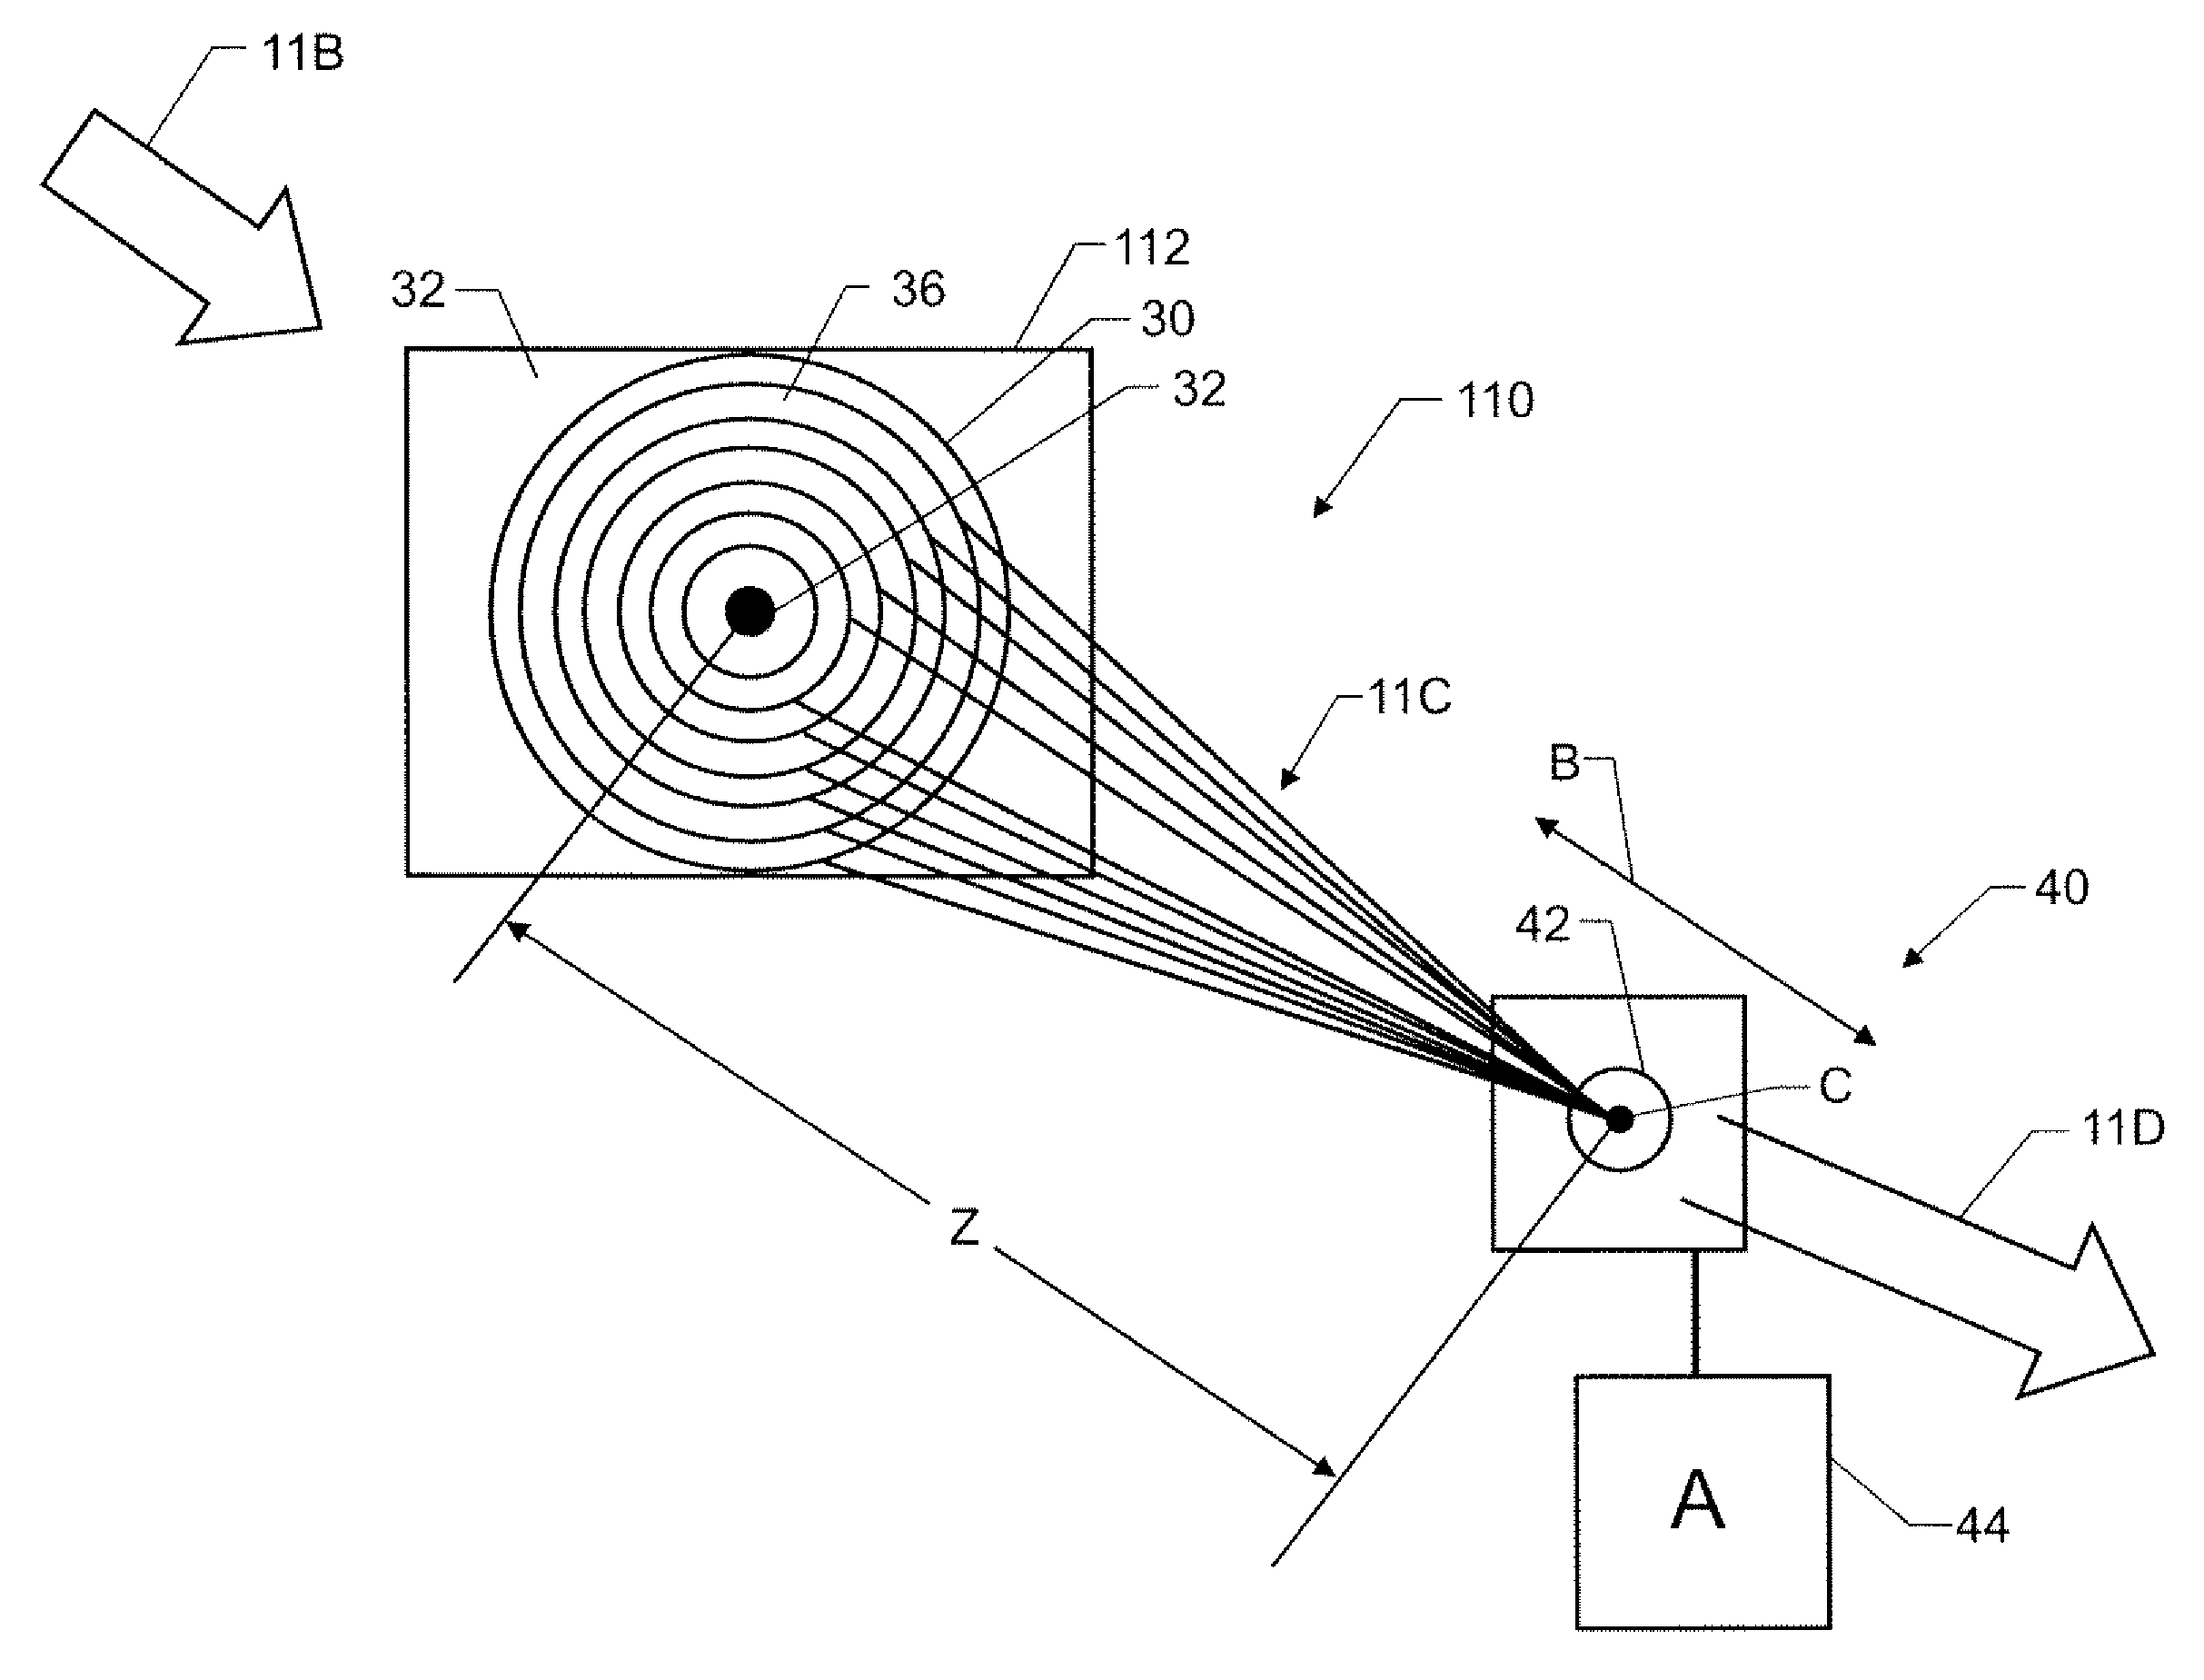 Micro Ring Grating Spectrometer with Adjustable Aperture